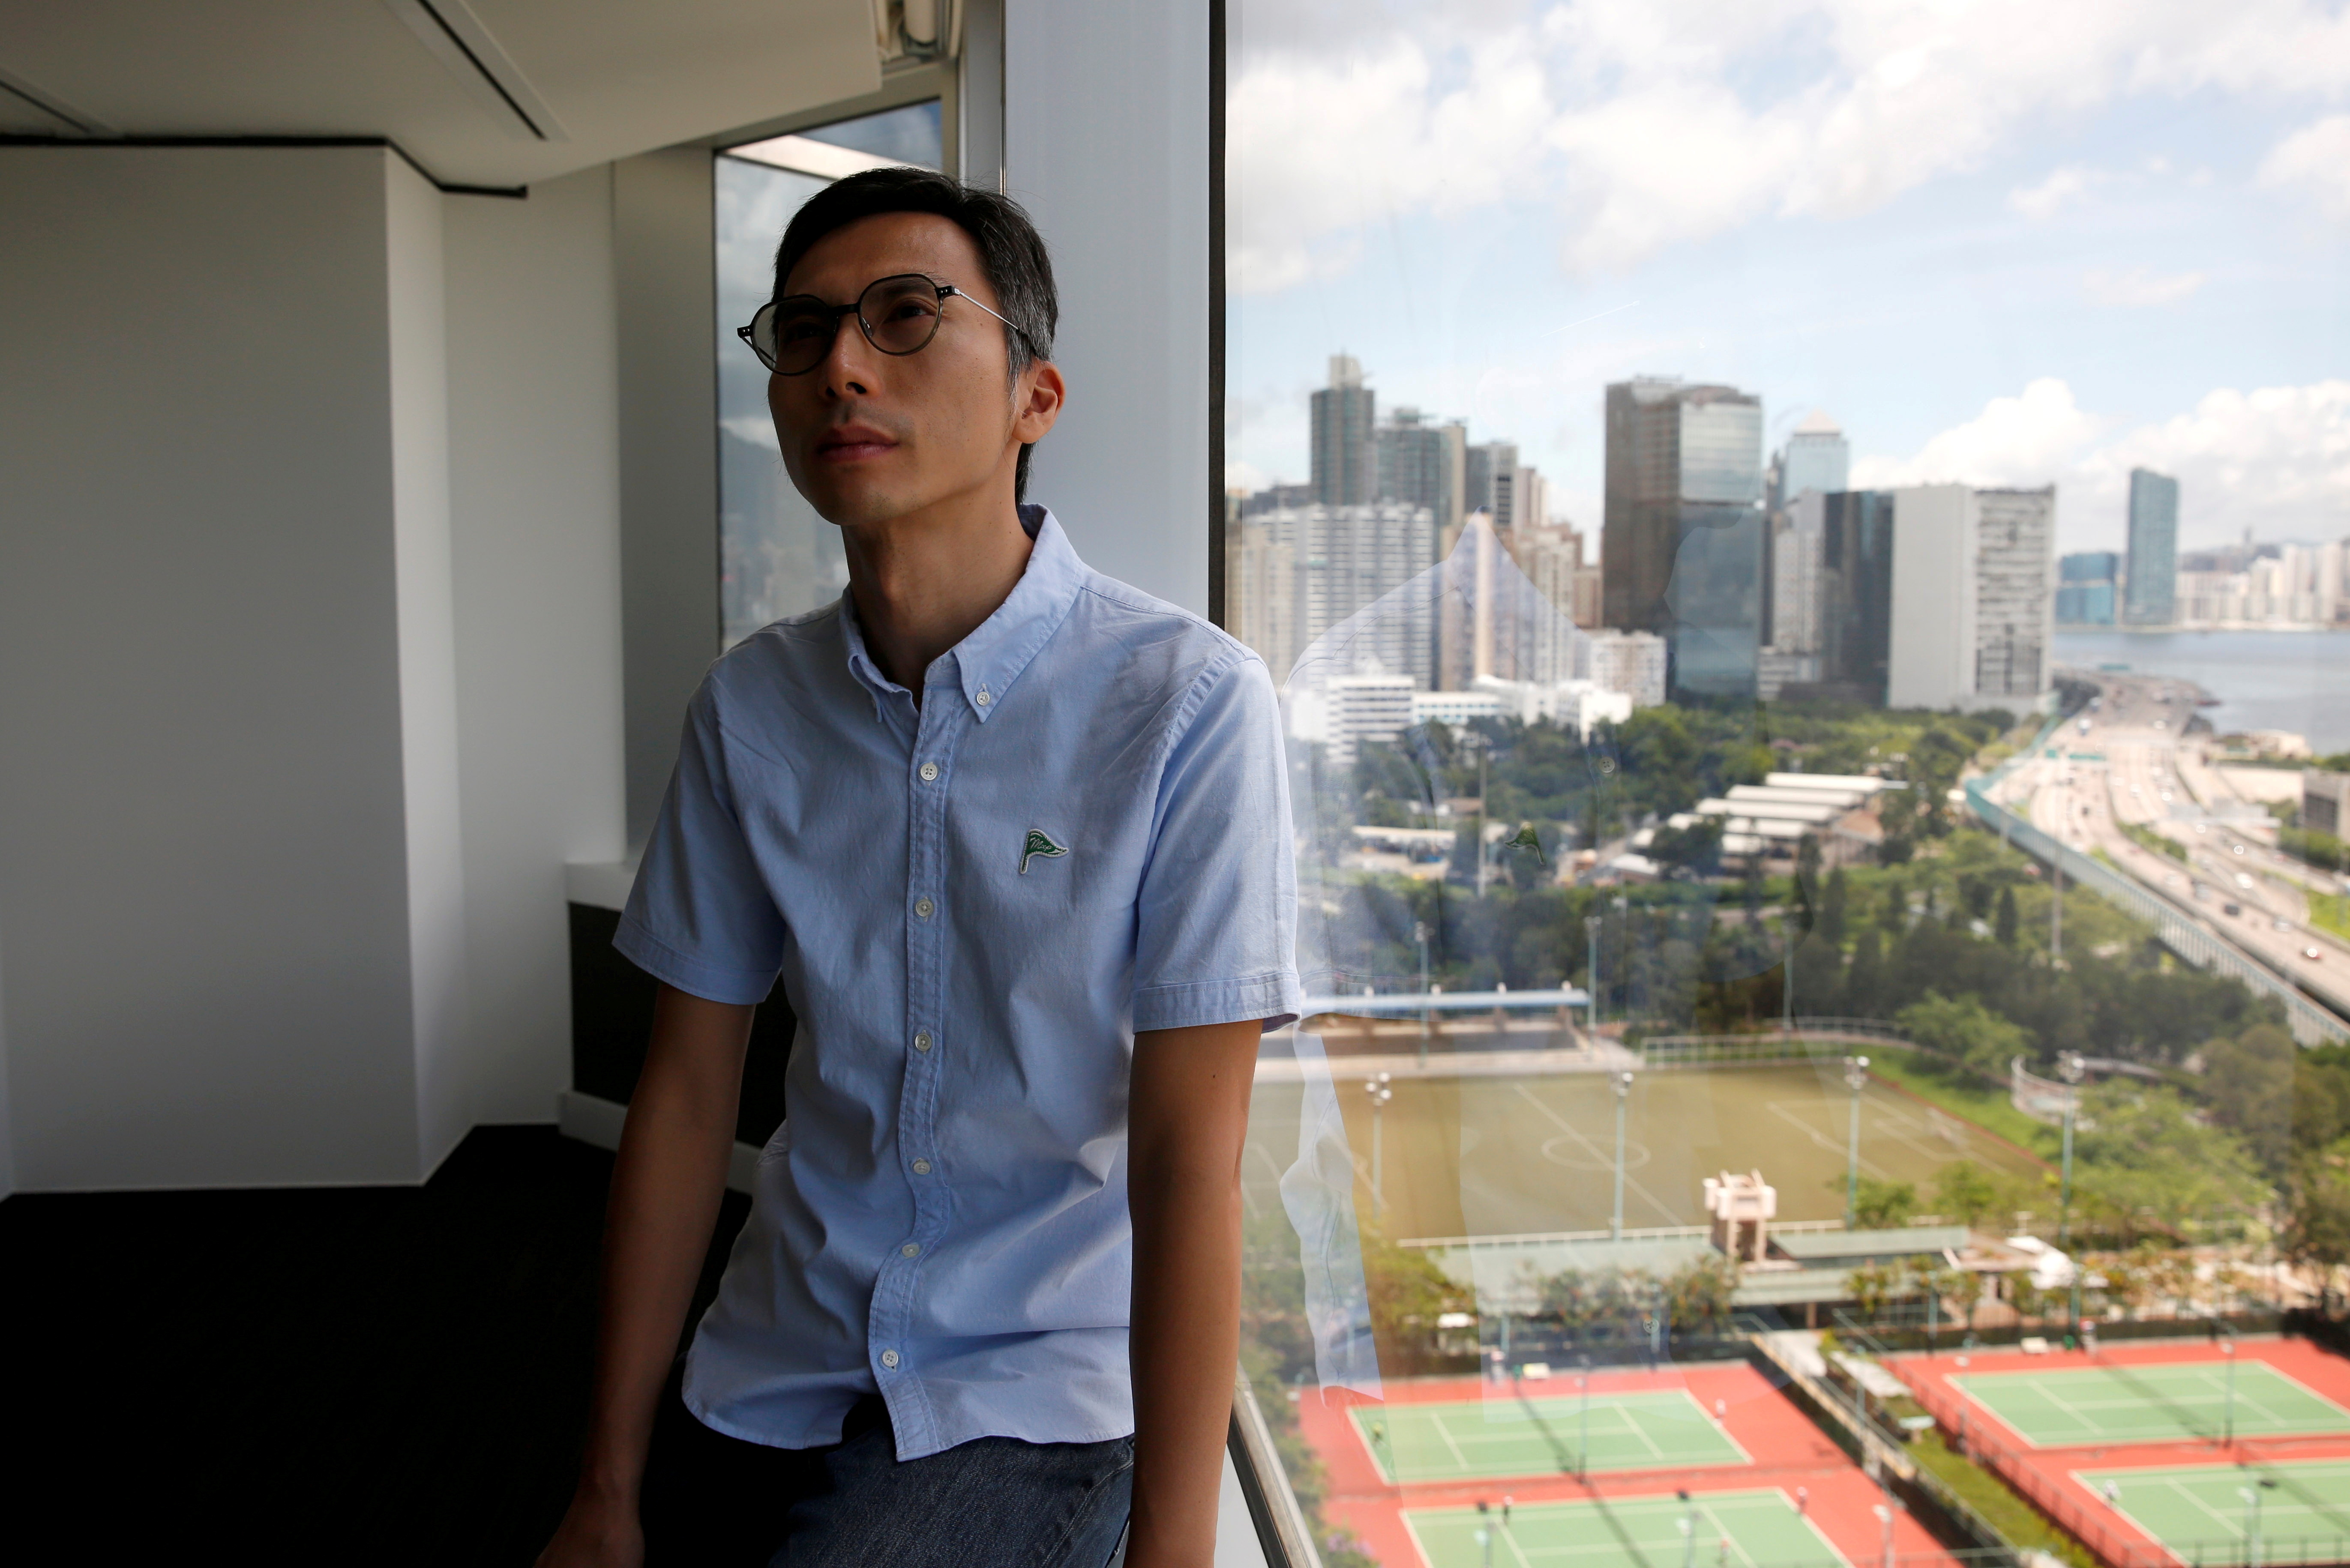 Hong Kong film director Kiwi Chow poses after interview with Reuters, in Hong Kong